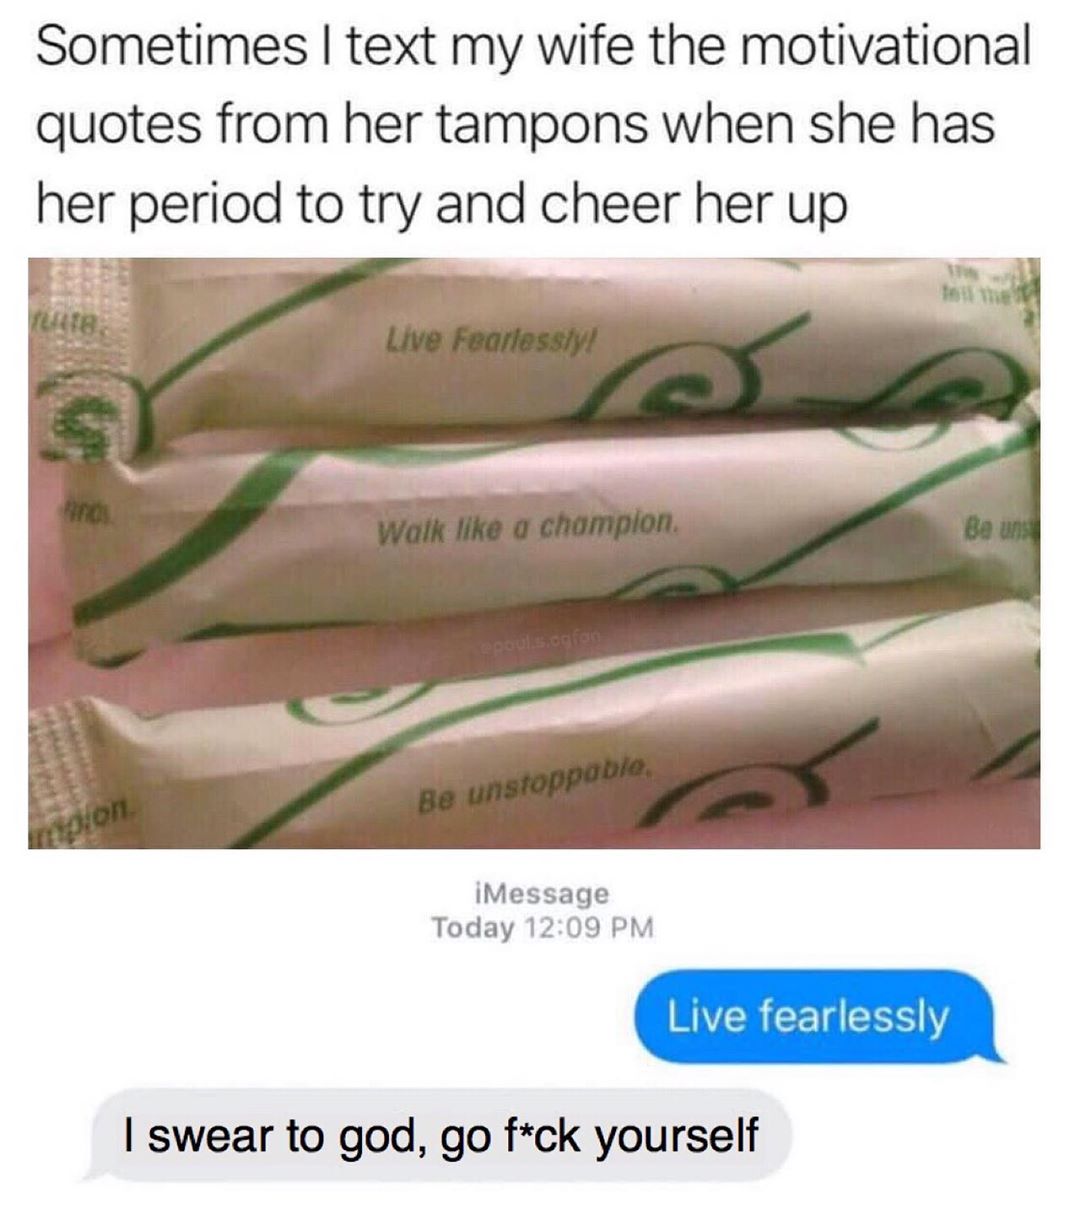 tampon motivational quotes - Sometimes I text my wife the motivational quotes from her tampons when she has her period to try and cheer her up Live Fearlessly! Walk a champion Be un Be unstoppable iMessage Today Live fearlessly I swear to god, go fck your